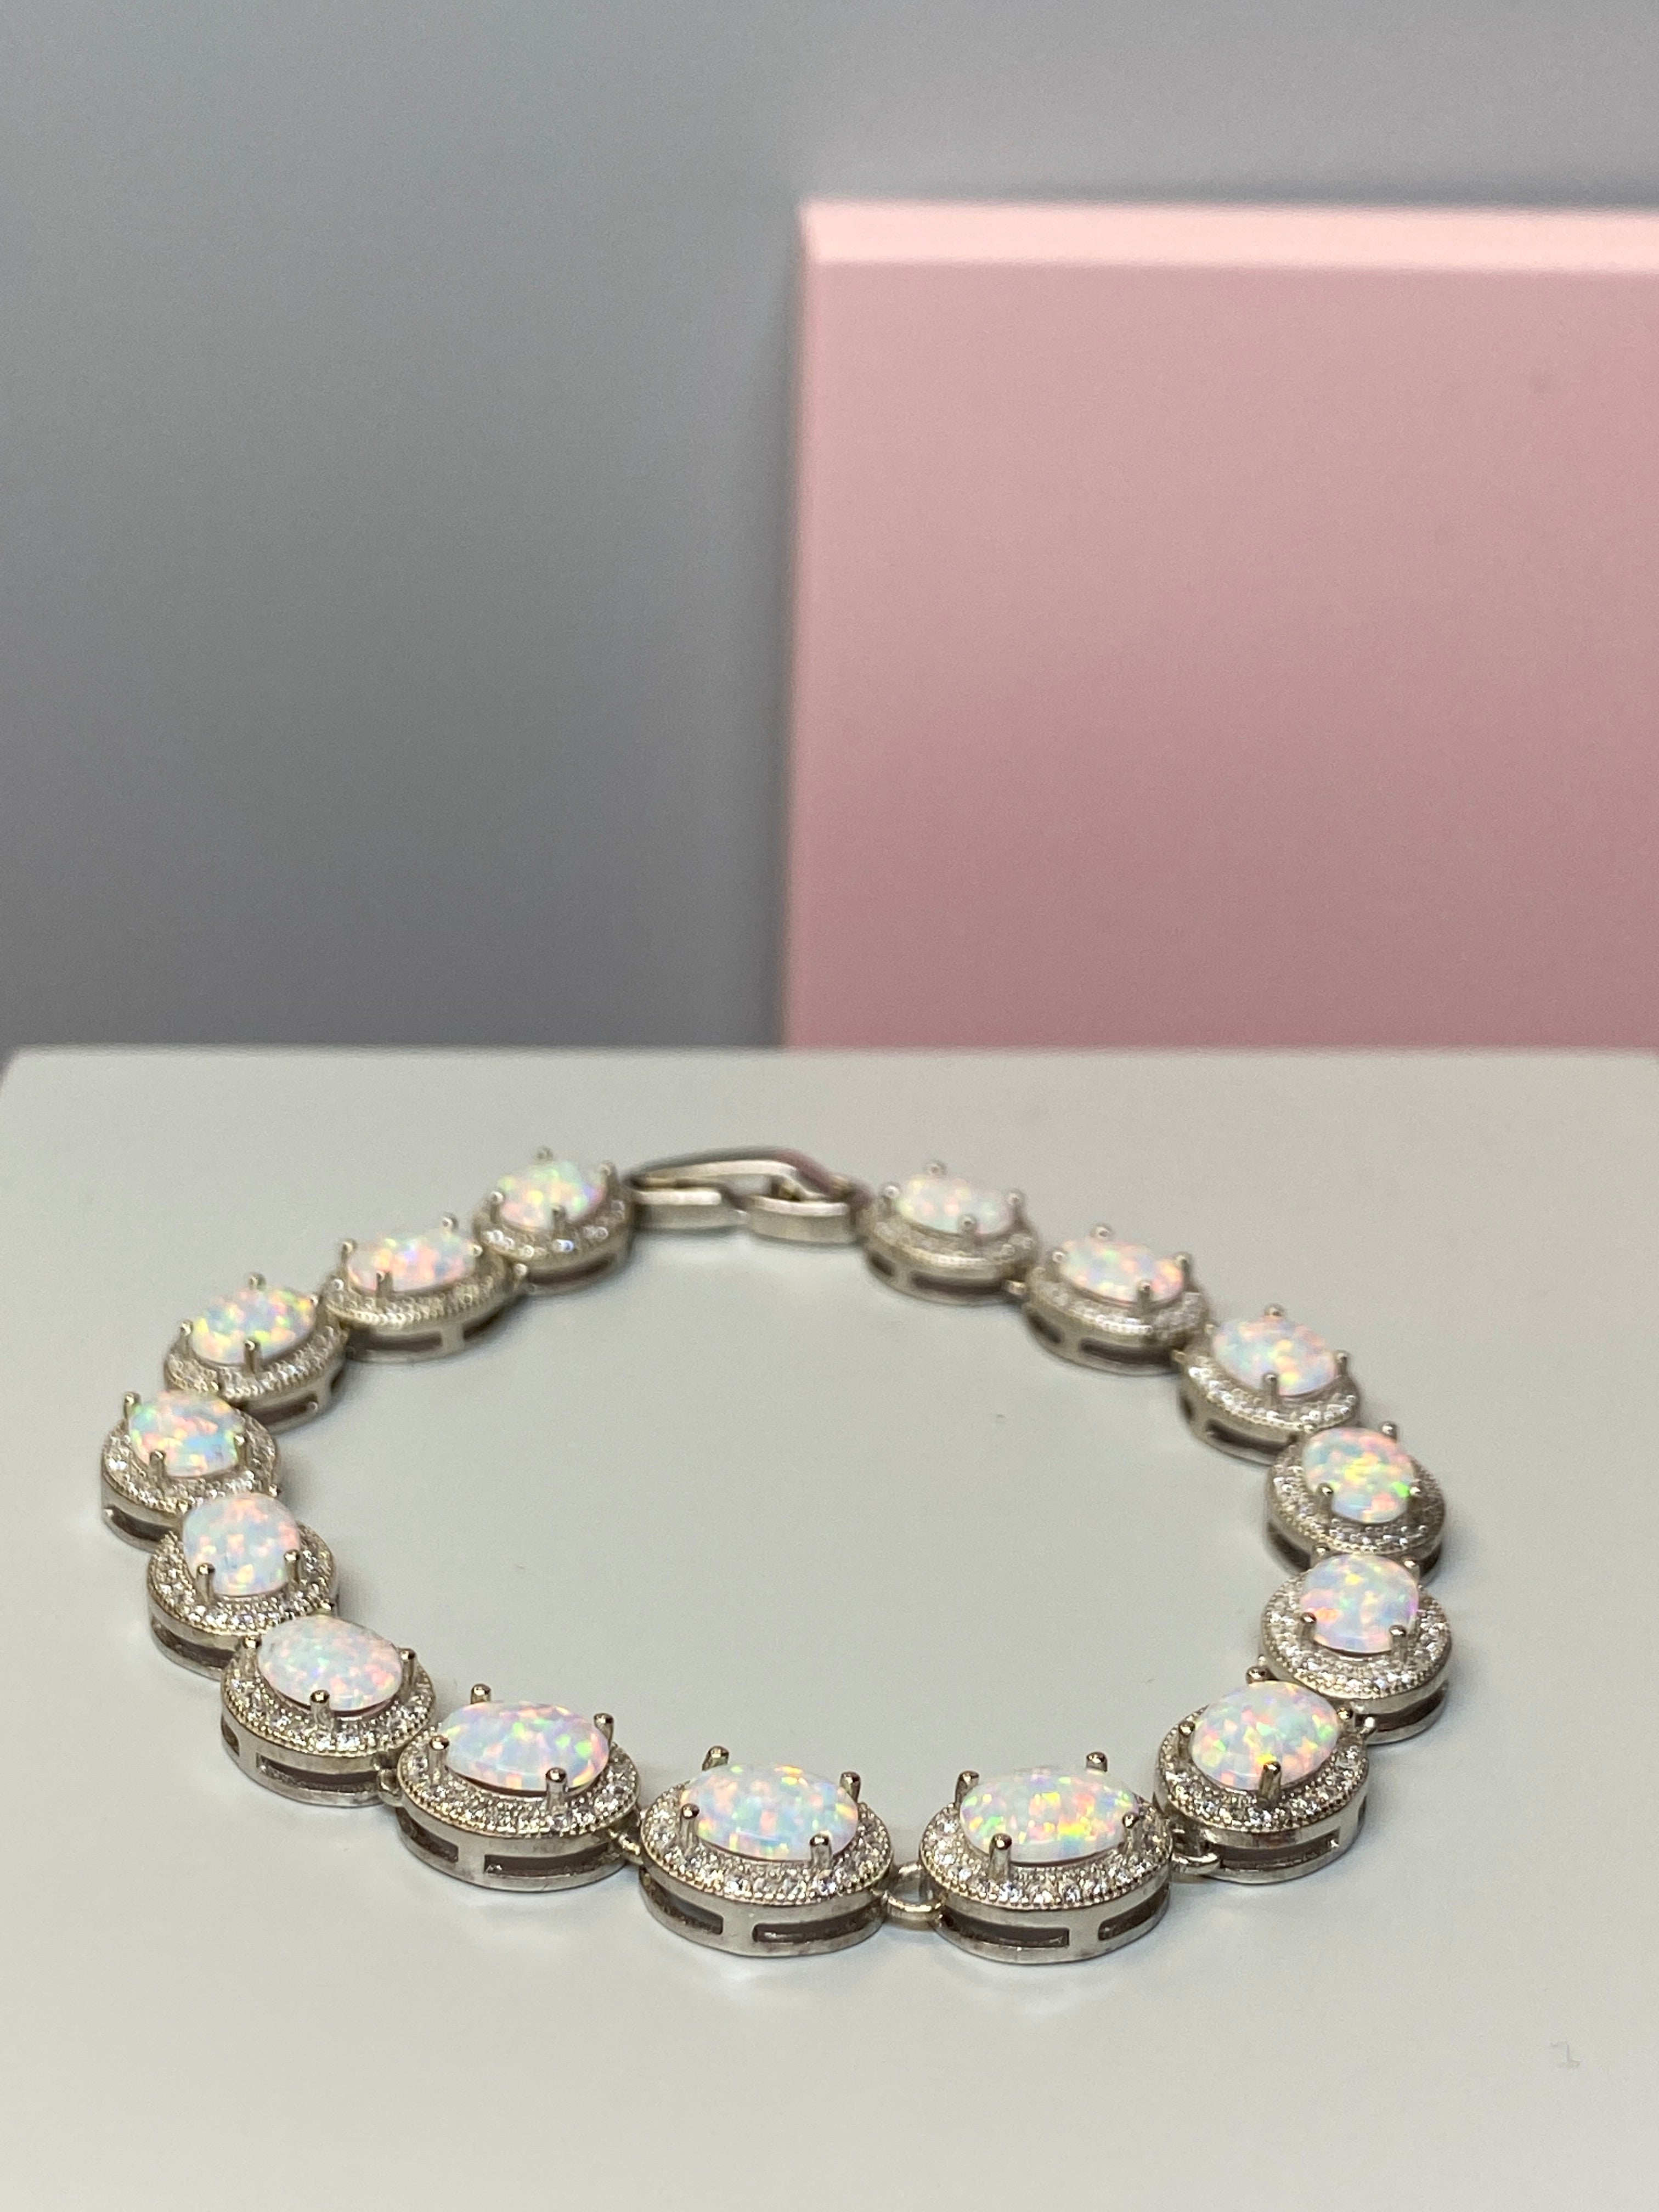 Silver Oval 'Opal' Bracelet - Hallmark Jewellers Formby & The Jewellers Bench Widnes